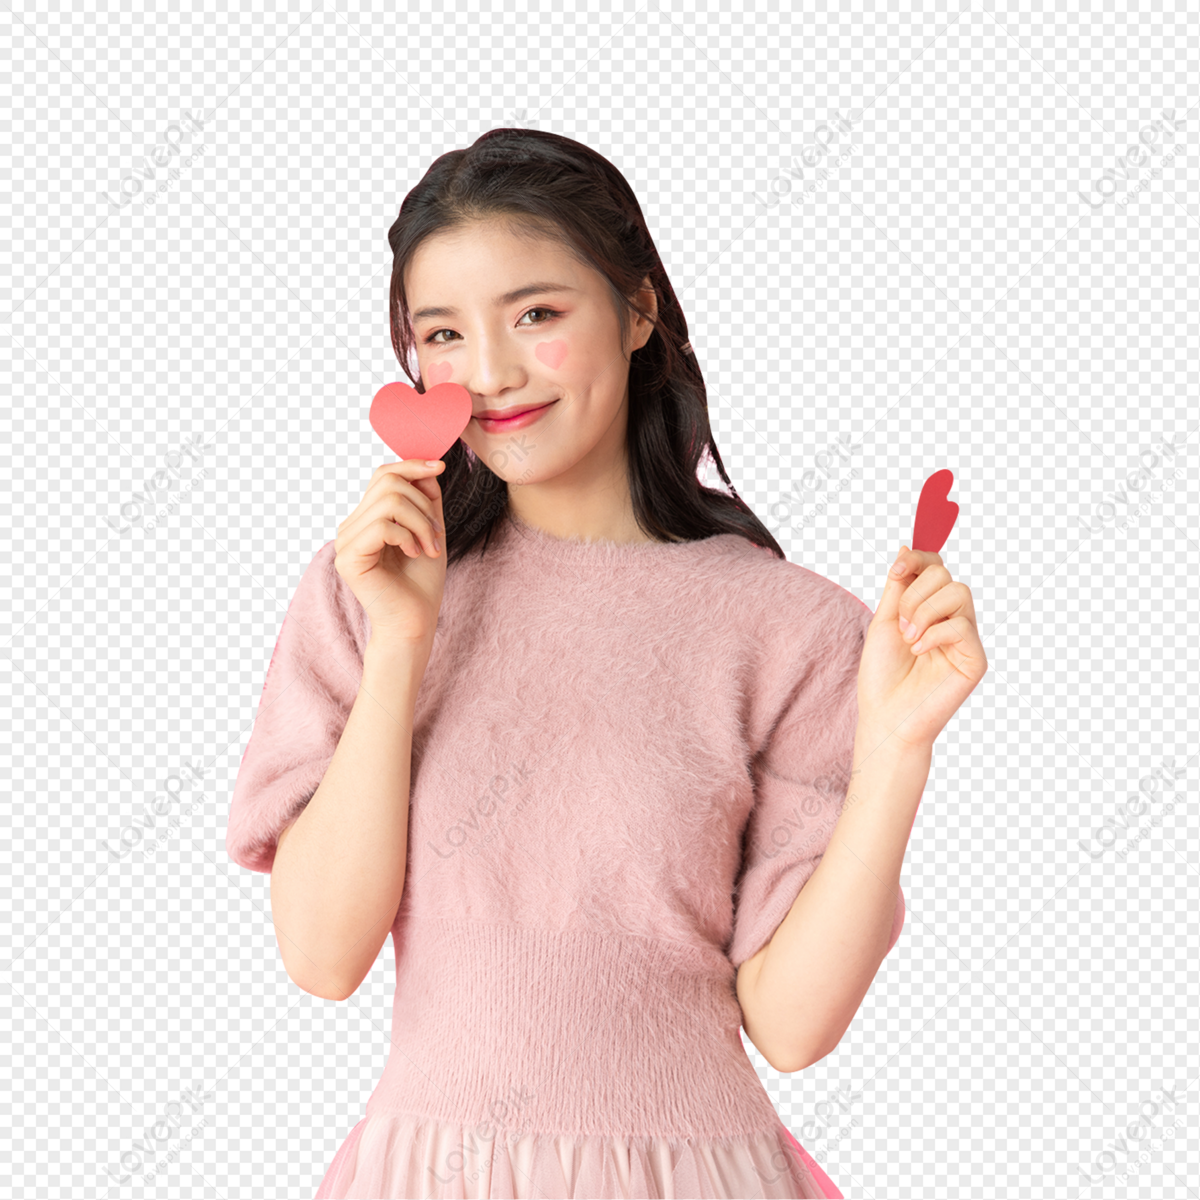 Girl PNG Images With Transparent Background